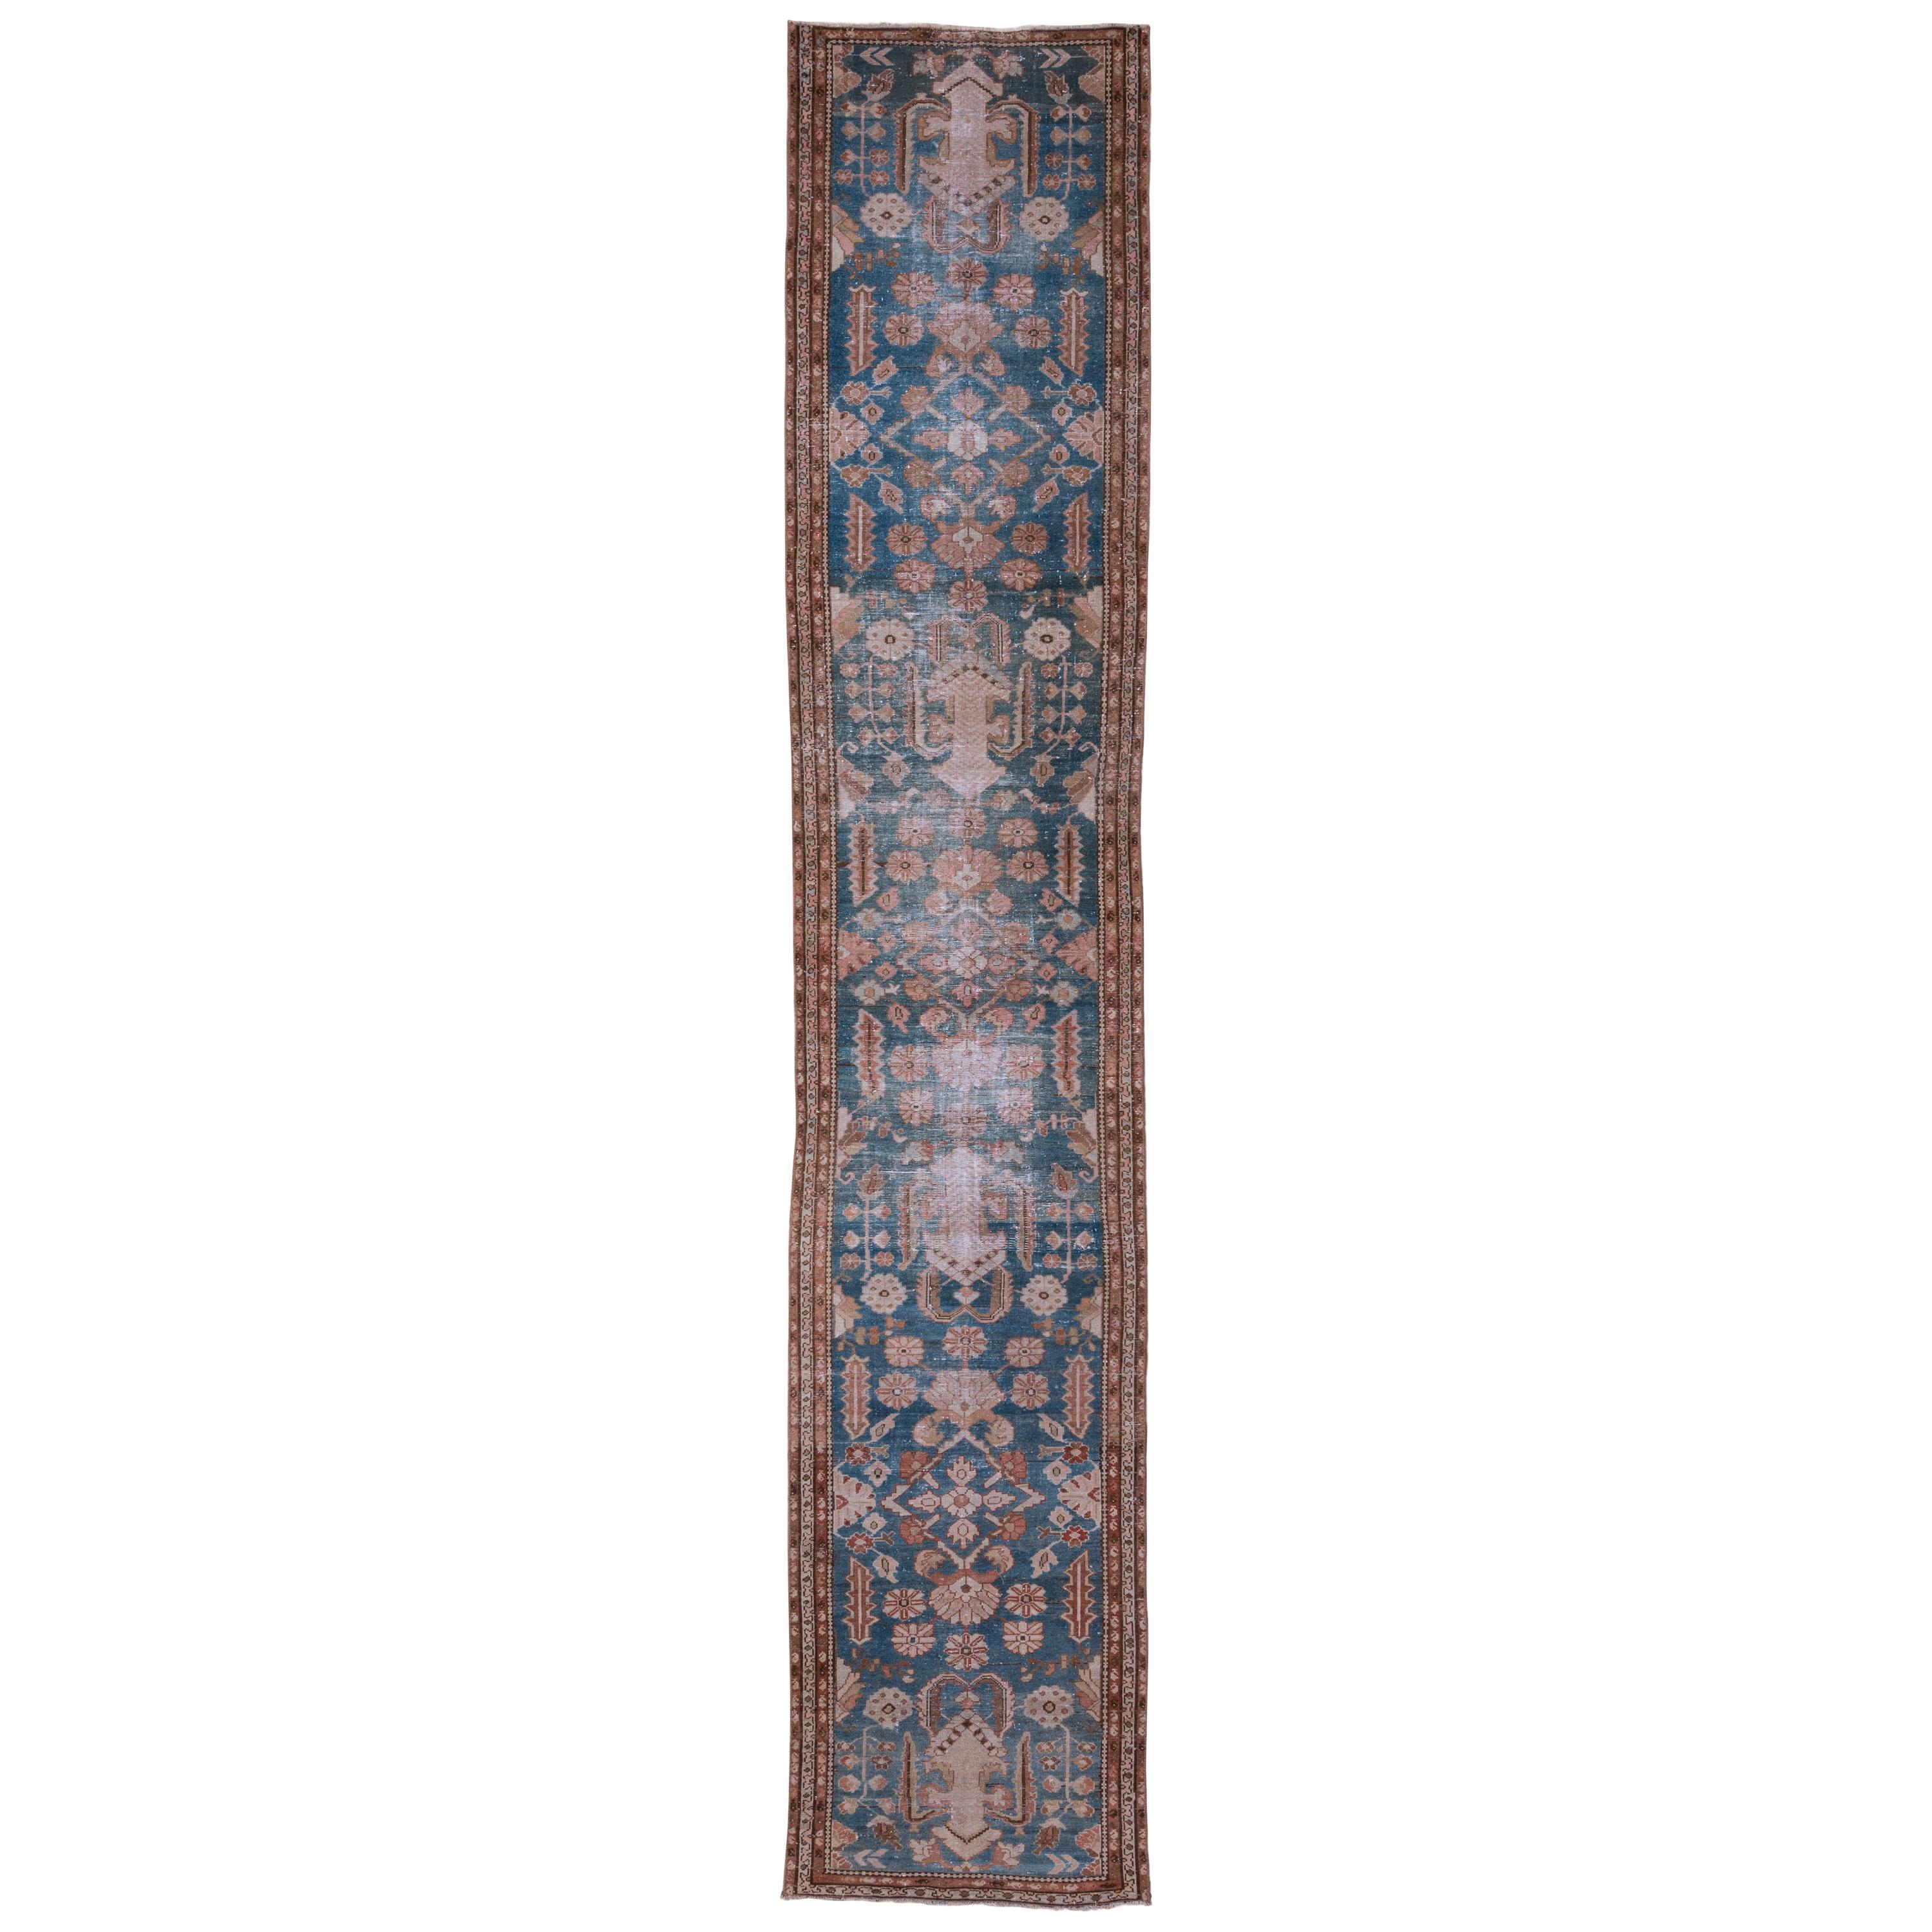 Antique Shabby Chic Malayer Runner For Sale